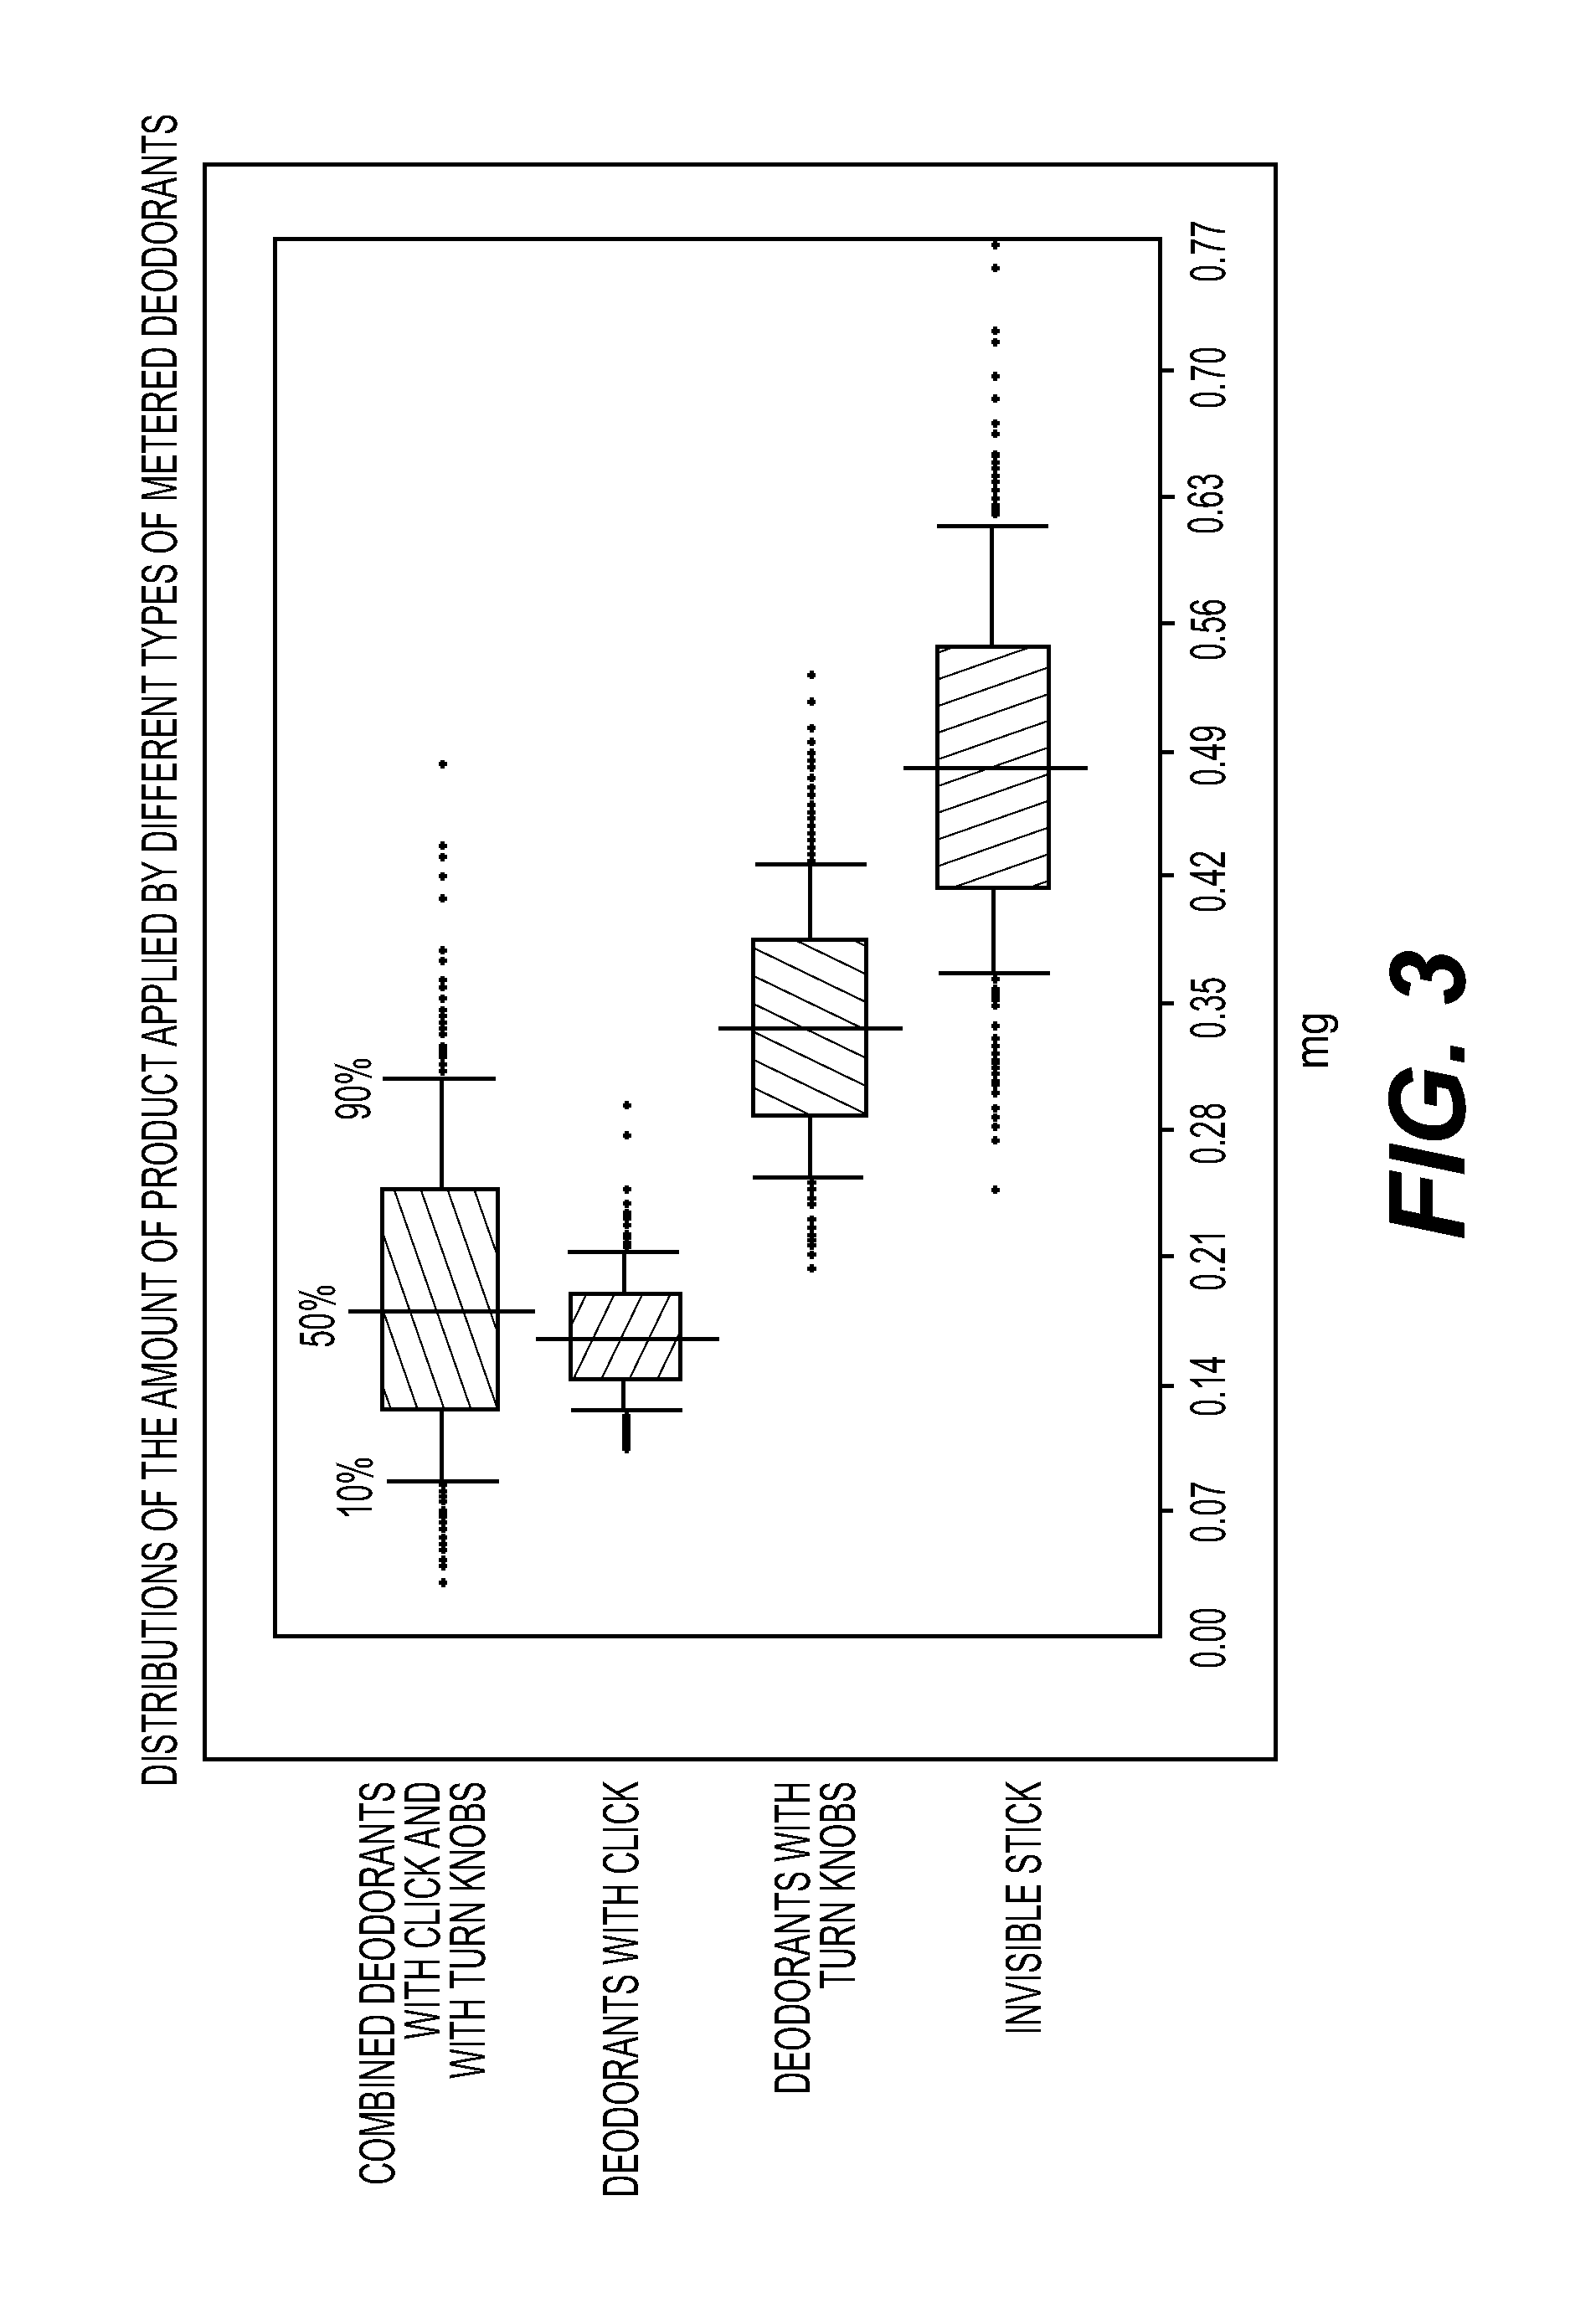 Topical compositions for treatment of excessive sweating and methods of use thereof